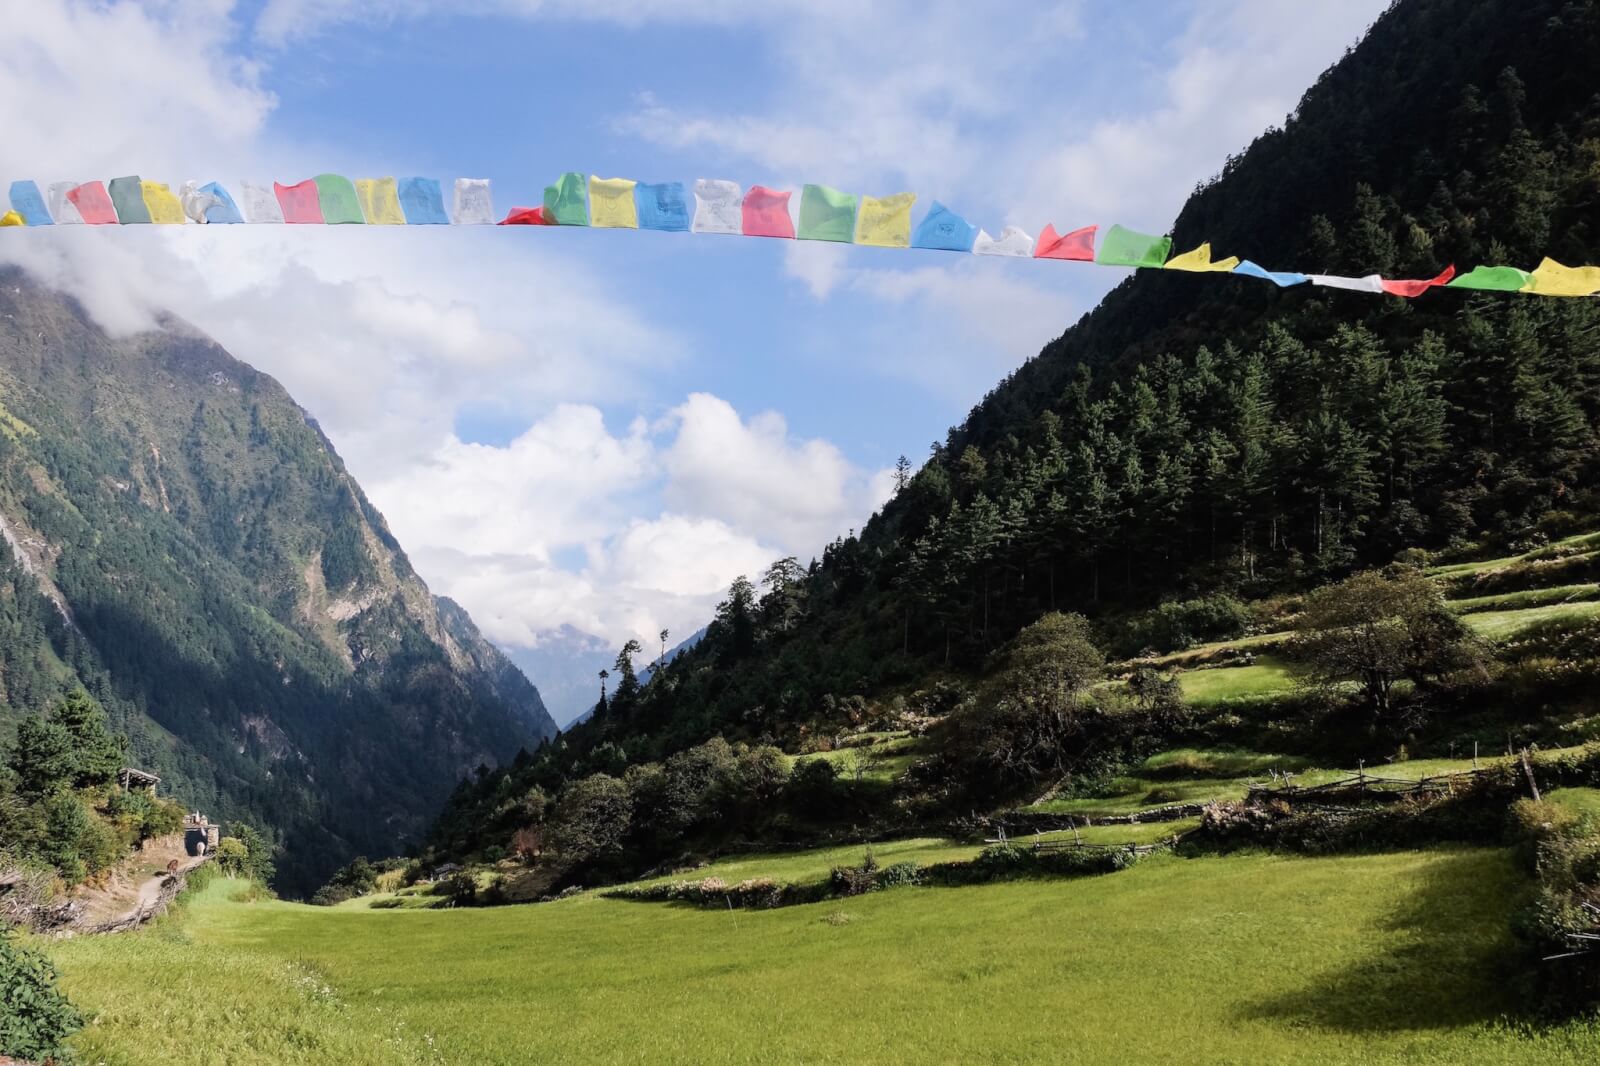 Tibetan prayer flags in front of mountains 